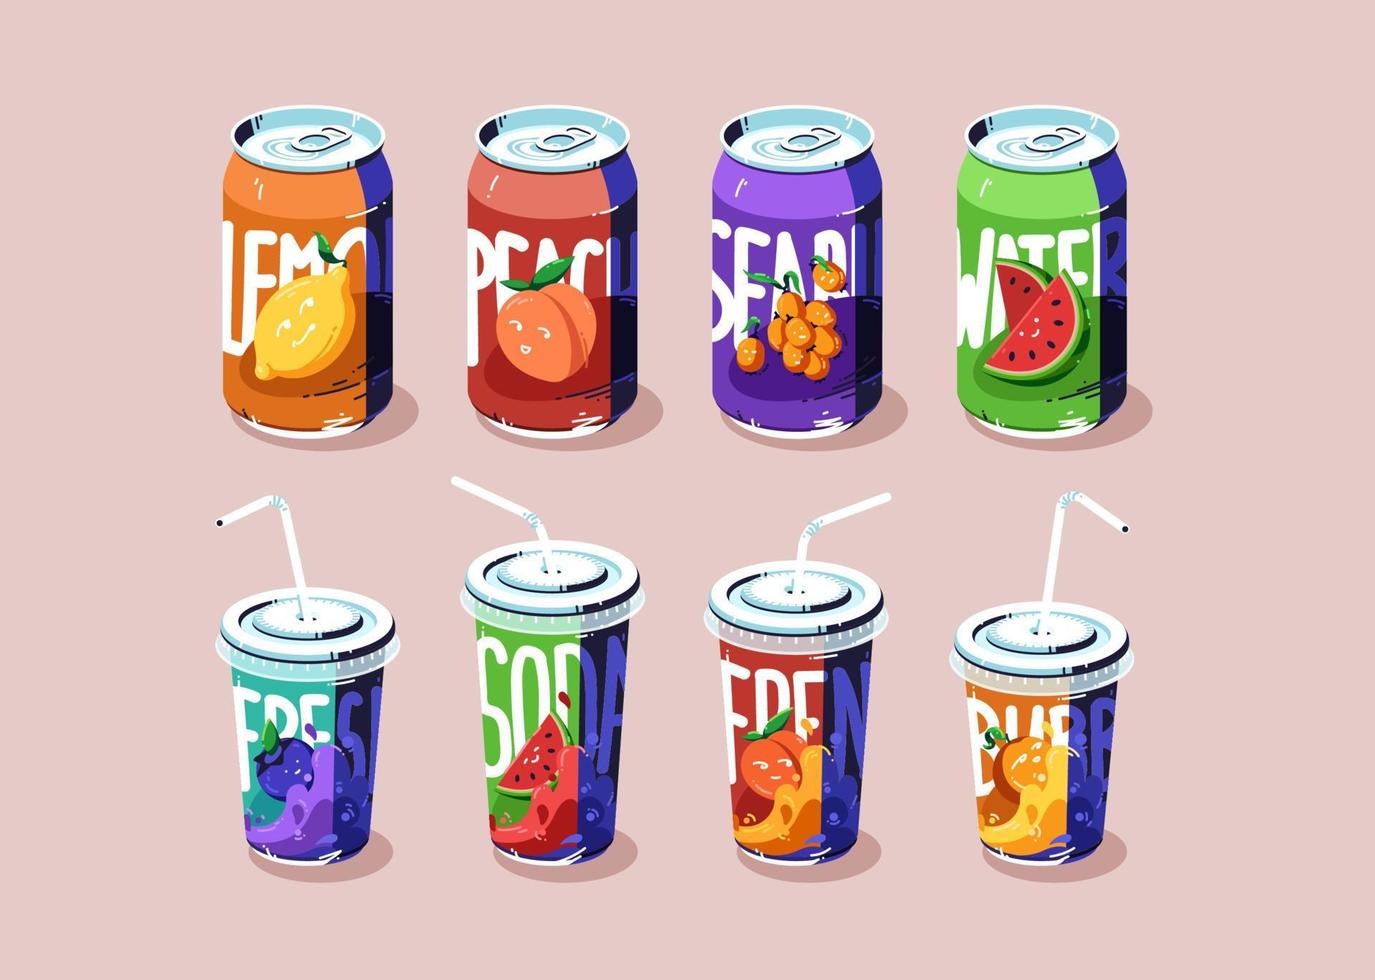 Soda cups and cans set, drinks of various flavors vector